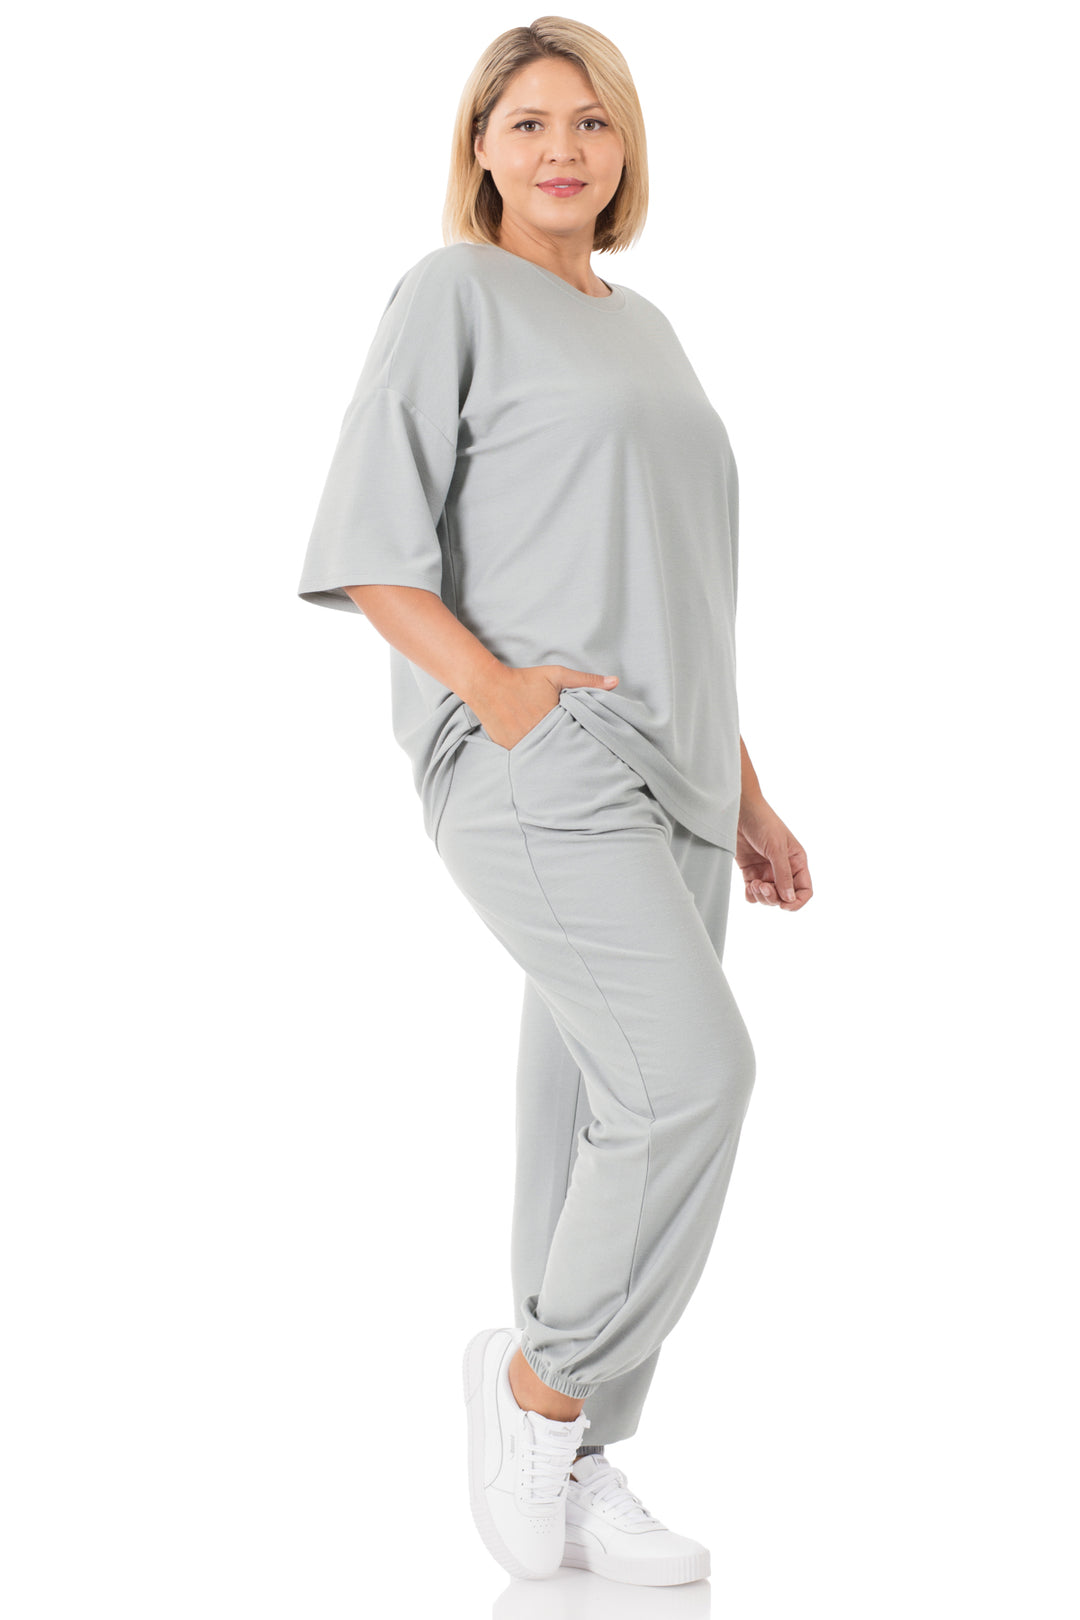 Soft French Terry Joggers & Top Sets (two colors)-jogger set-Zenana-Styled by Steph-Women's Fashion Clothing Boutique, Indiana